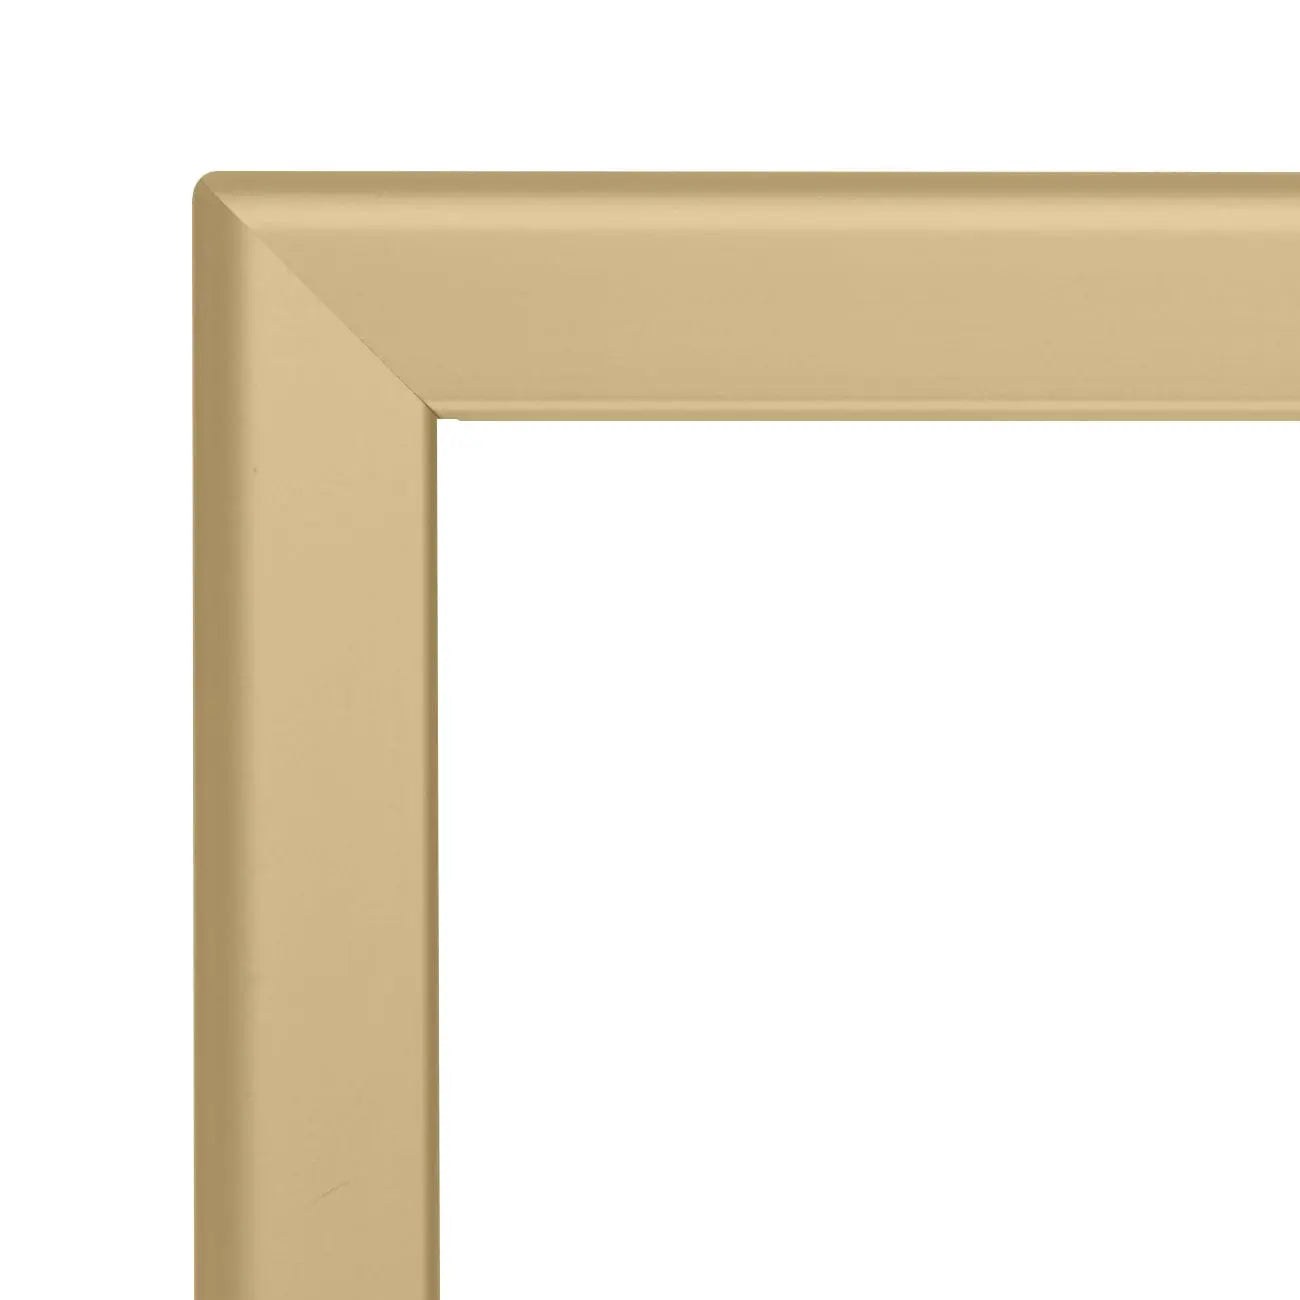 22x28 Gold SnapeZo® Snap Frame - 1.25" Profile - Snap Frames Direct